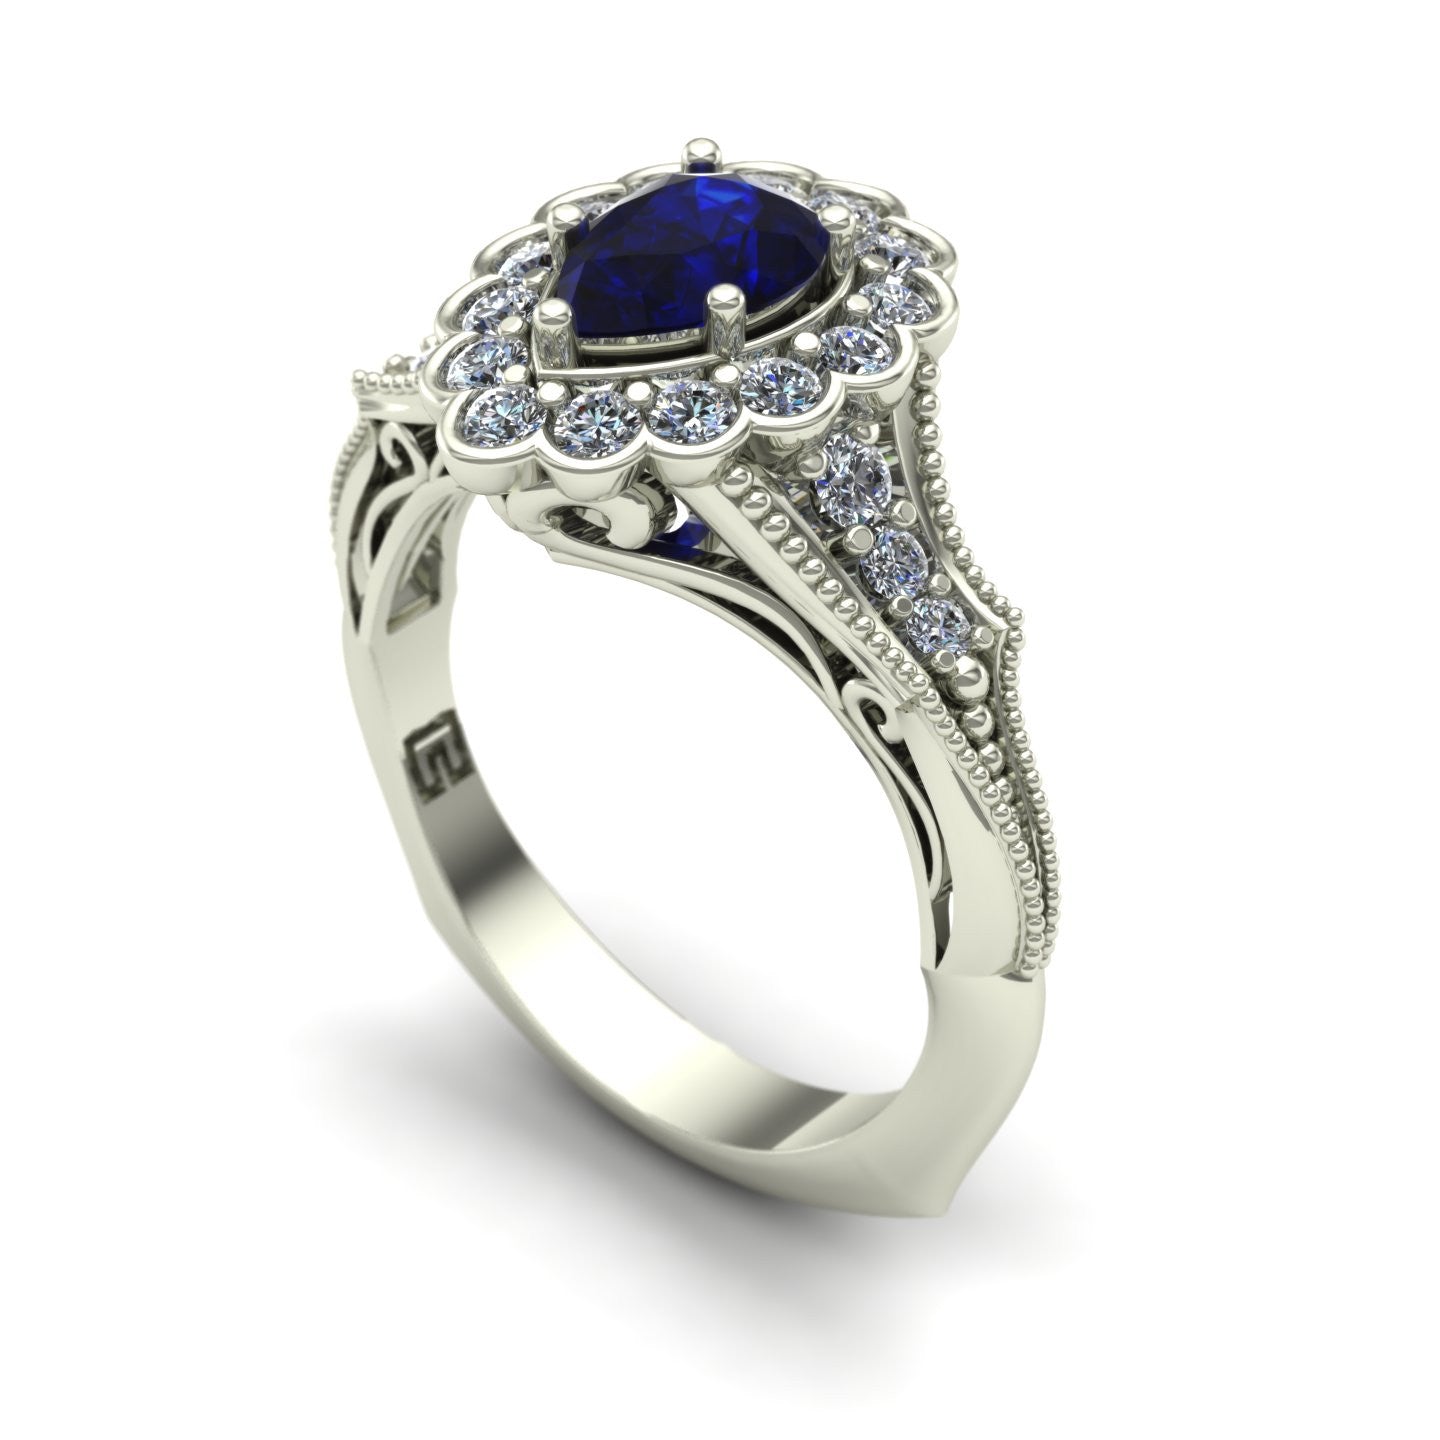 Pear blue sapphire and diamond vintage ring in 18k white gold - Charles Babb Designs